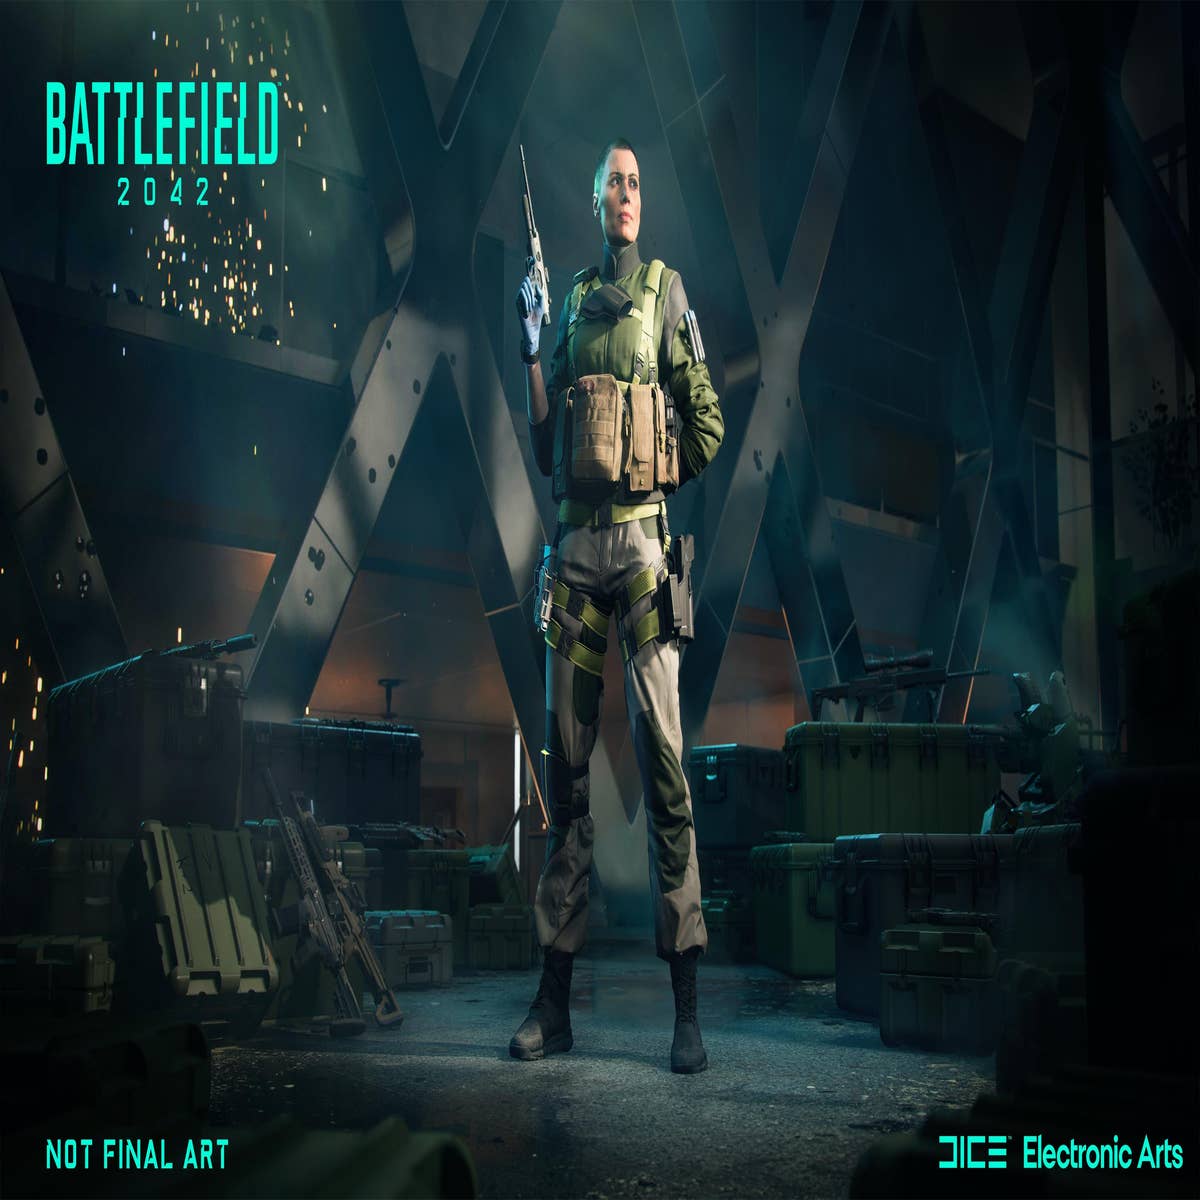 Free download Battlefield 2042 Archives 